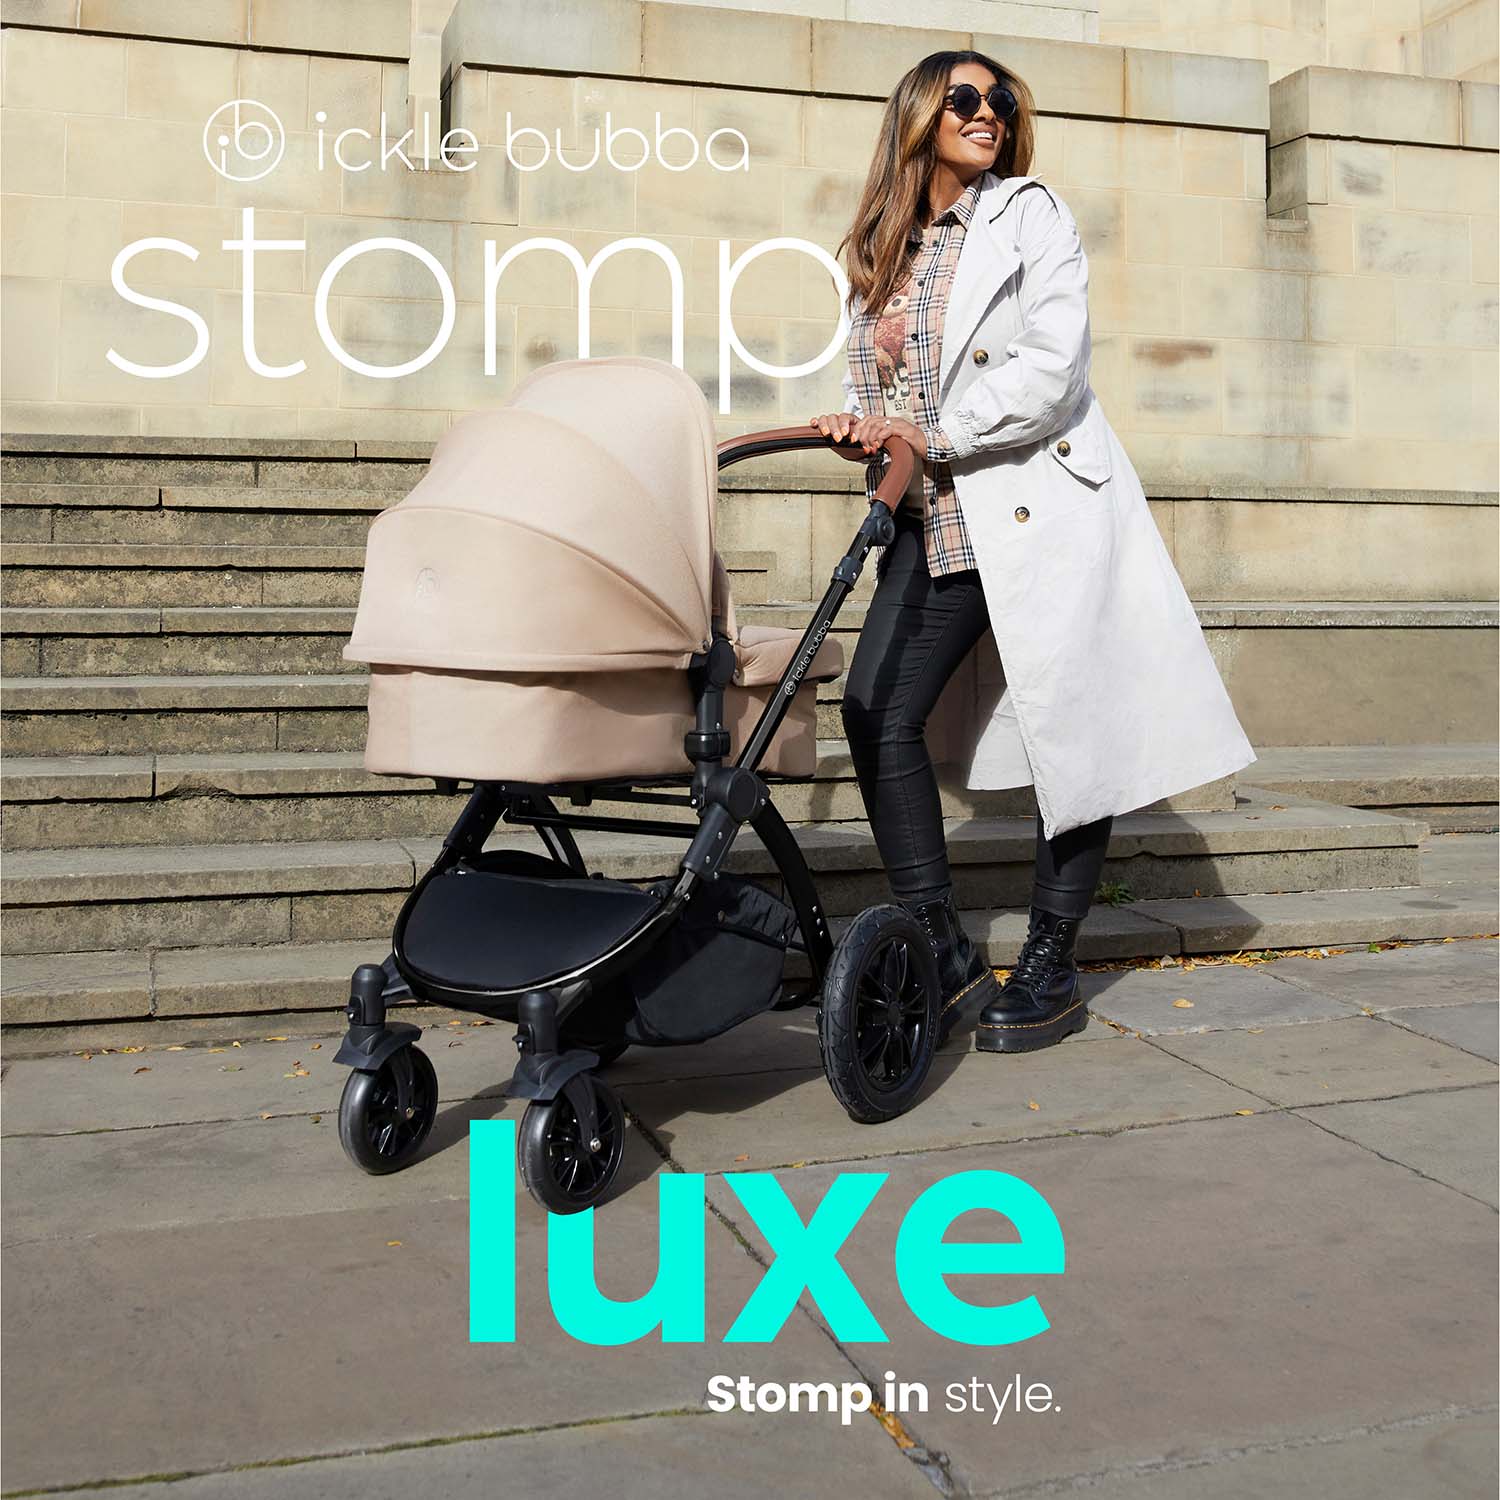 Stomp in style with the Ickle Bubba Stomp Luxe All-in-One Travel System